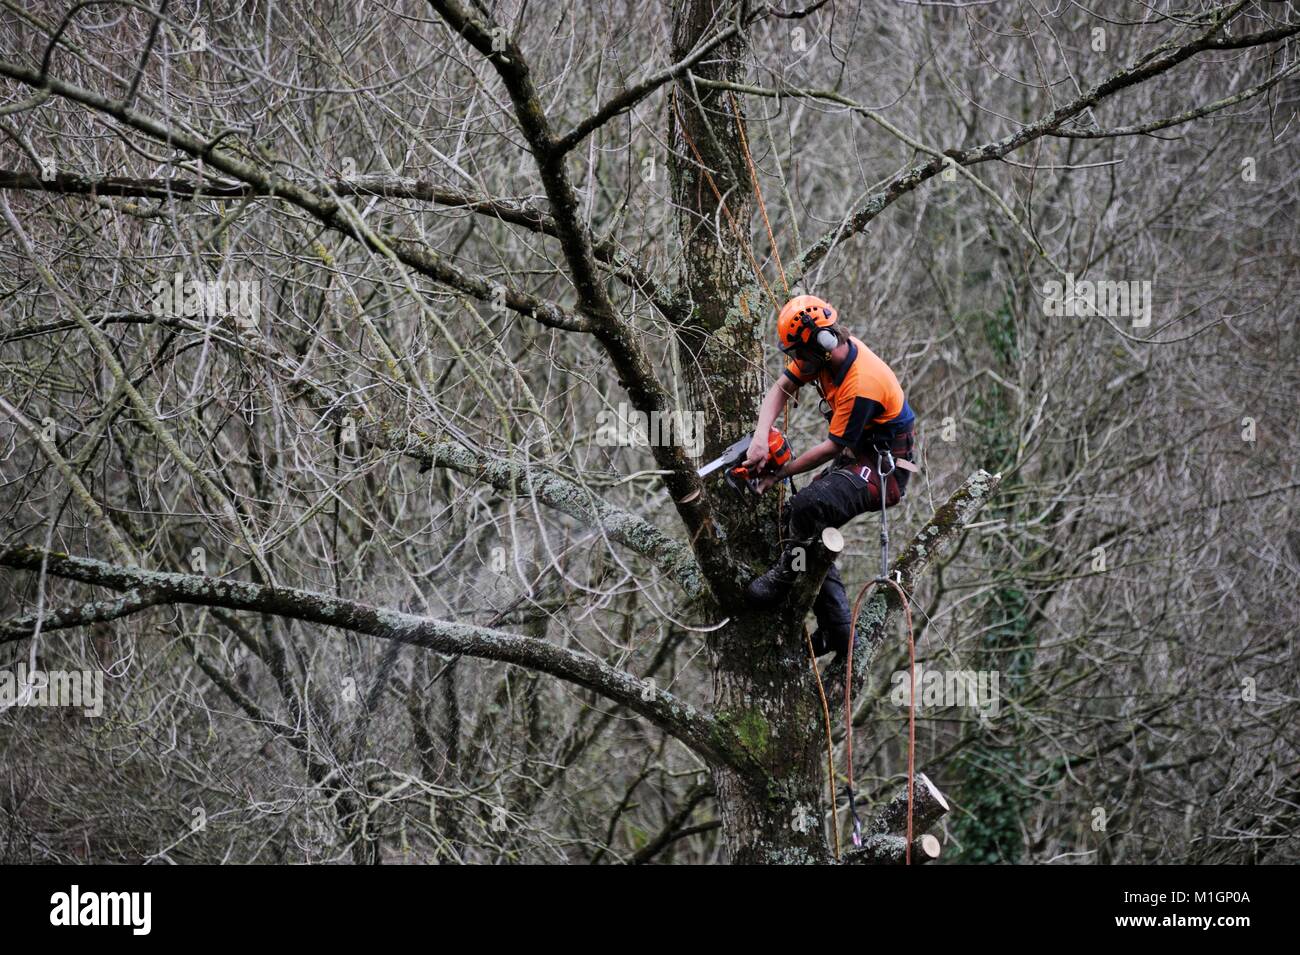 Man working in protective safety clothing, climbing a tree and performing aerial chainsaw work, delimbing, pruning, sectioning the tree, Wales, UK Stock Photo